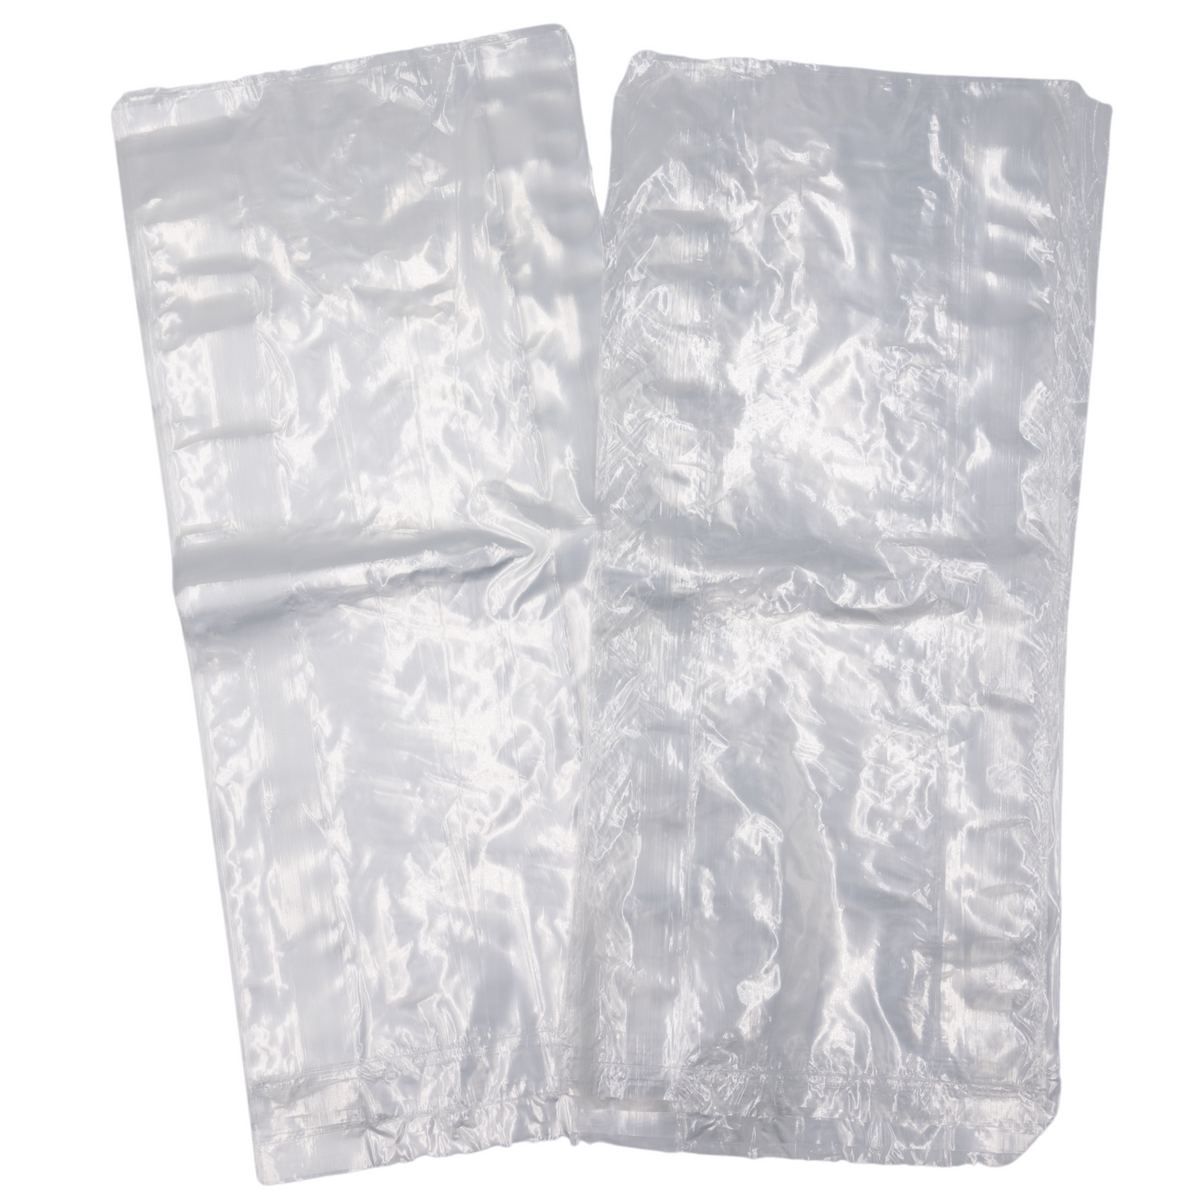 Clear (Natural Color) LDPE Poly Vented Bags (With Venting Holes) - 8